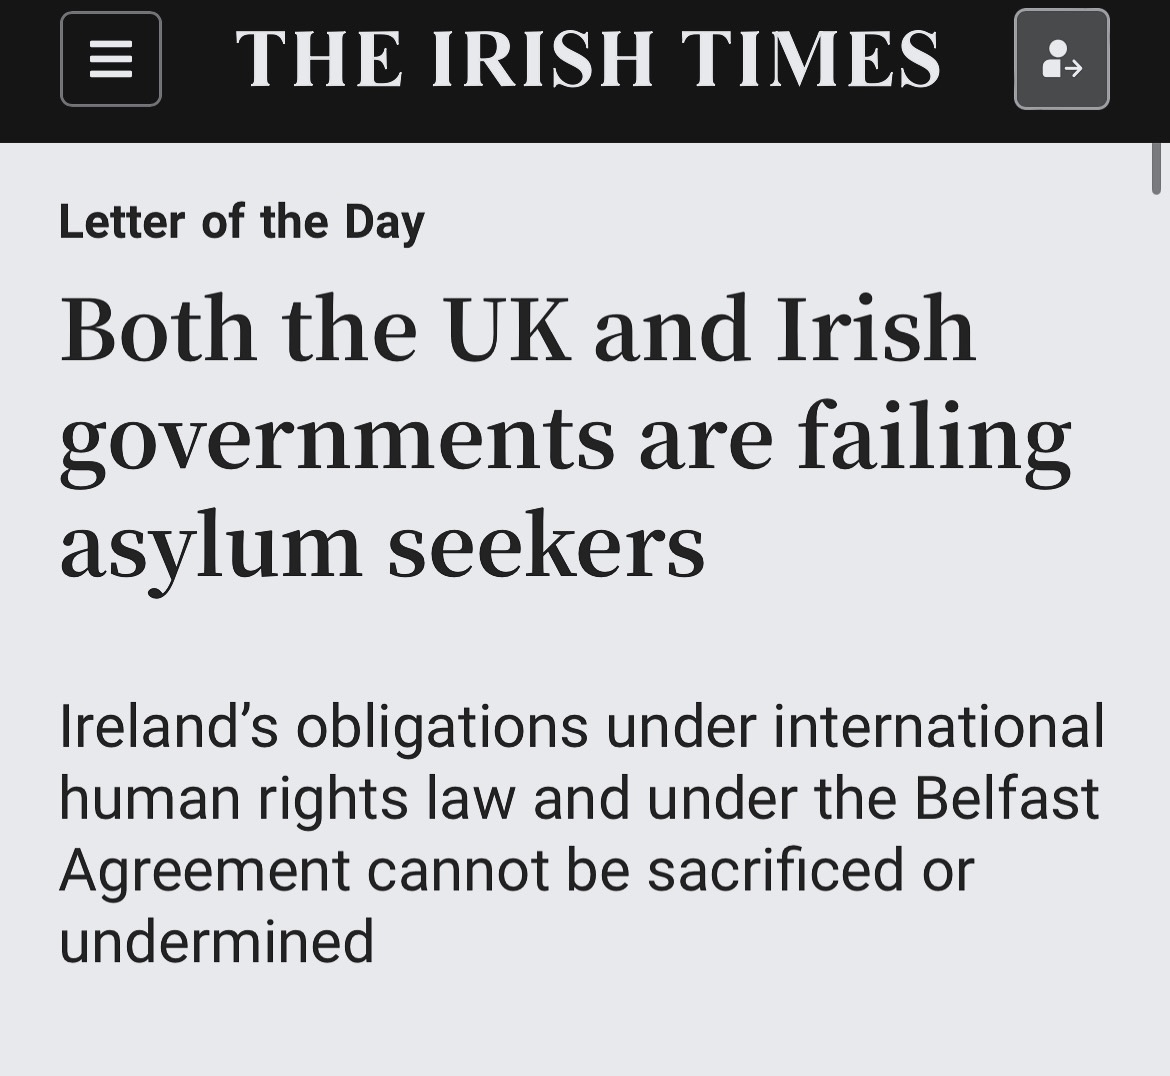 We’ve co-signed this very important @IrishTimes letter of the day. People arriving on our shores deserve the dignity, respect, safety & care envisaged in the UN 1951 Refugee Convention. Both Irish & British Governments must change the paths they are on. irishtimes.com/opinion/letter…